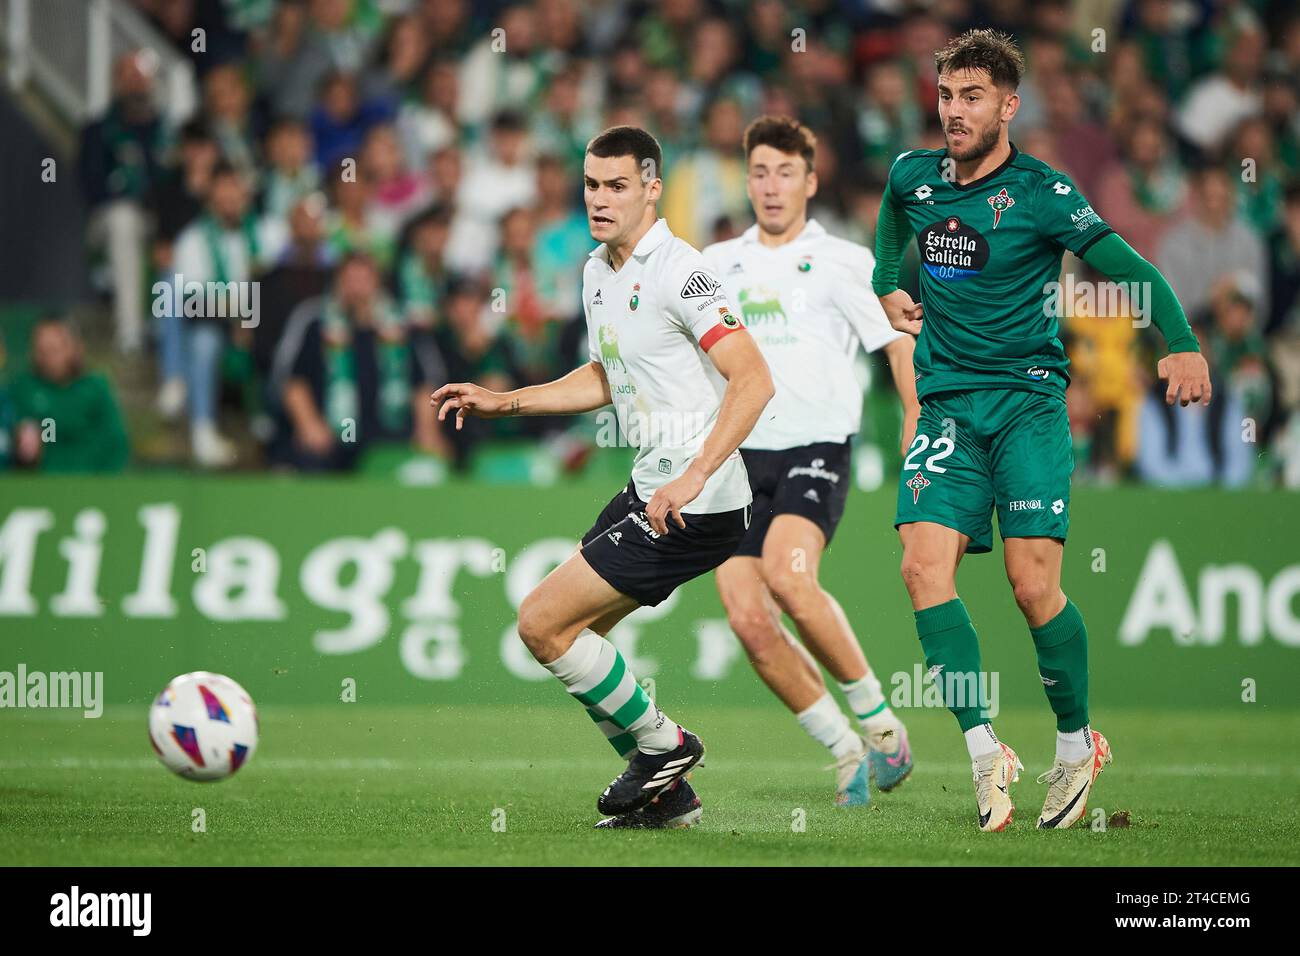 Alvaro Mantilla of Real Racing Club duels for the ball with Iker Losada of Racing Club Ferrol during the LaLiga Hypermotion match between Real Racing Stock Photo